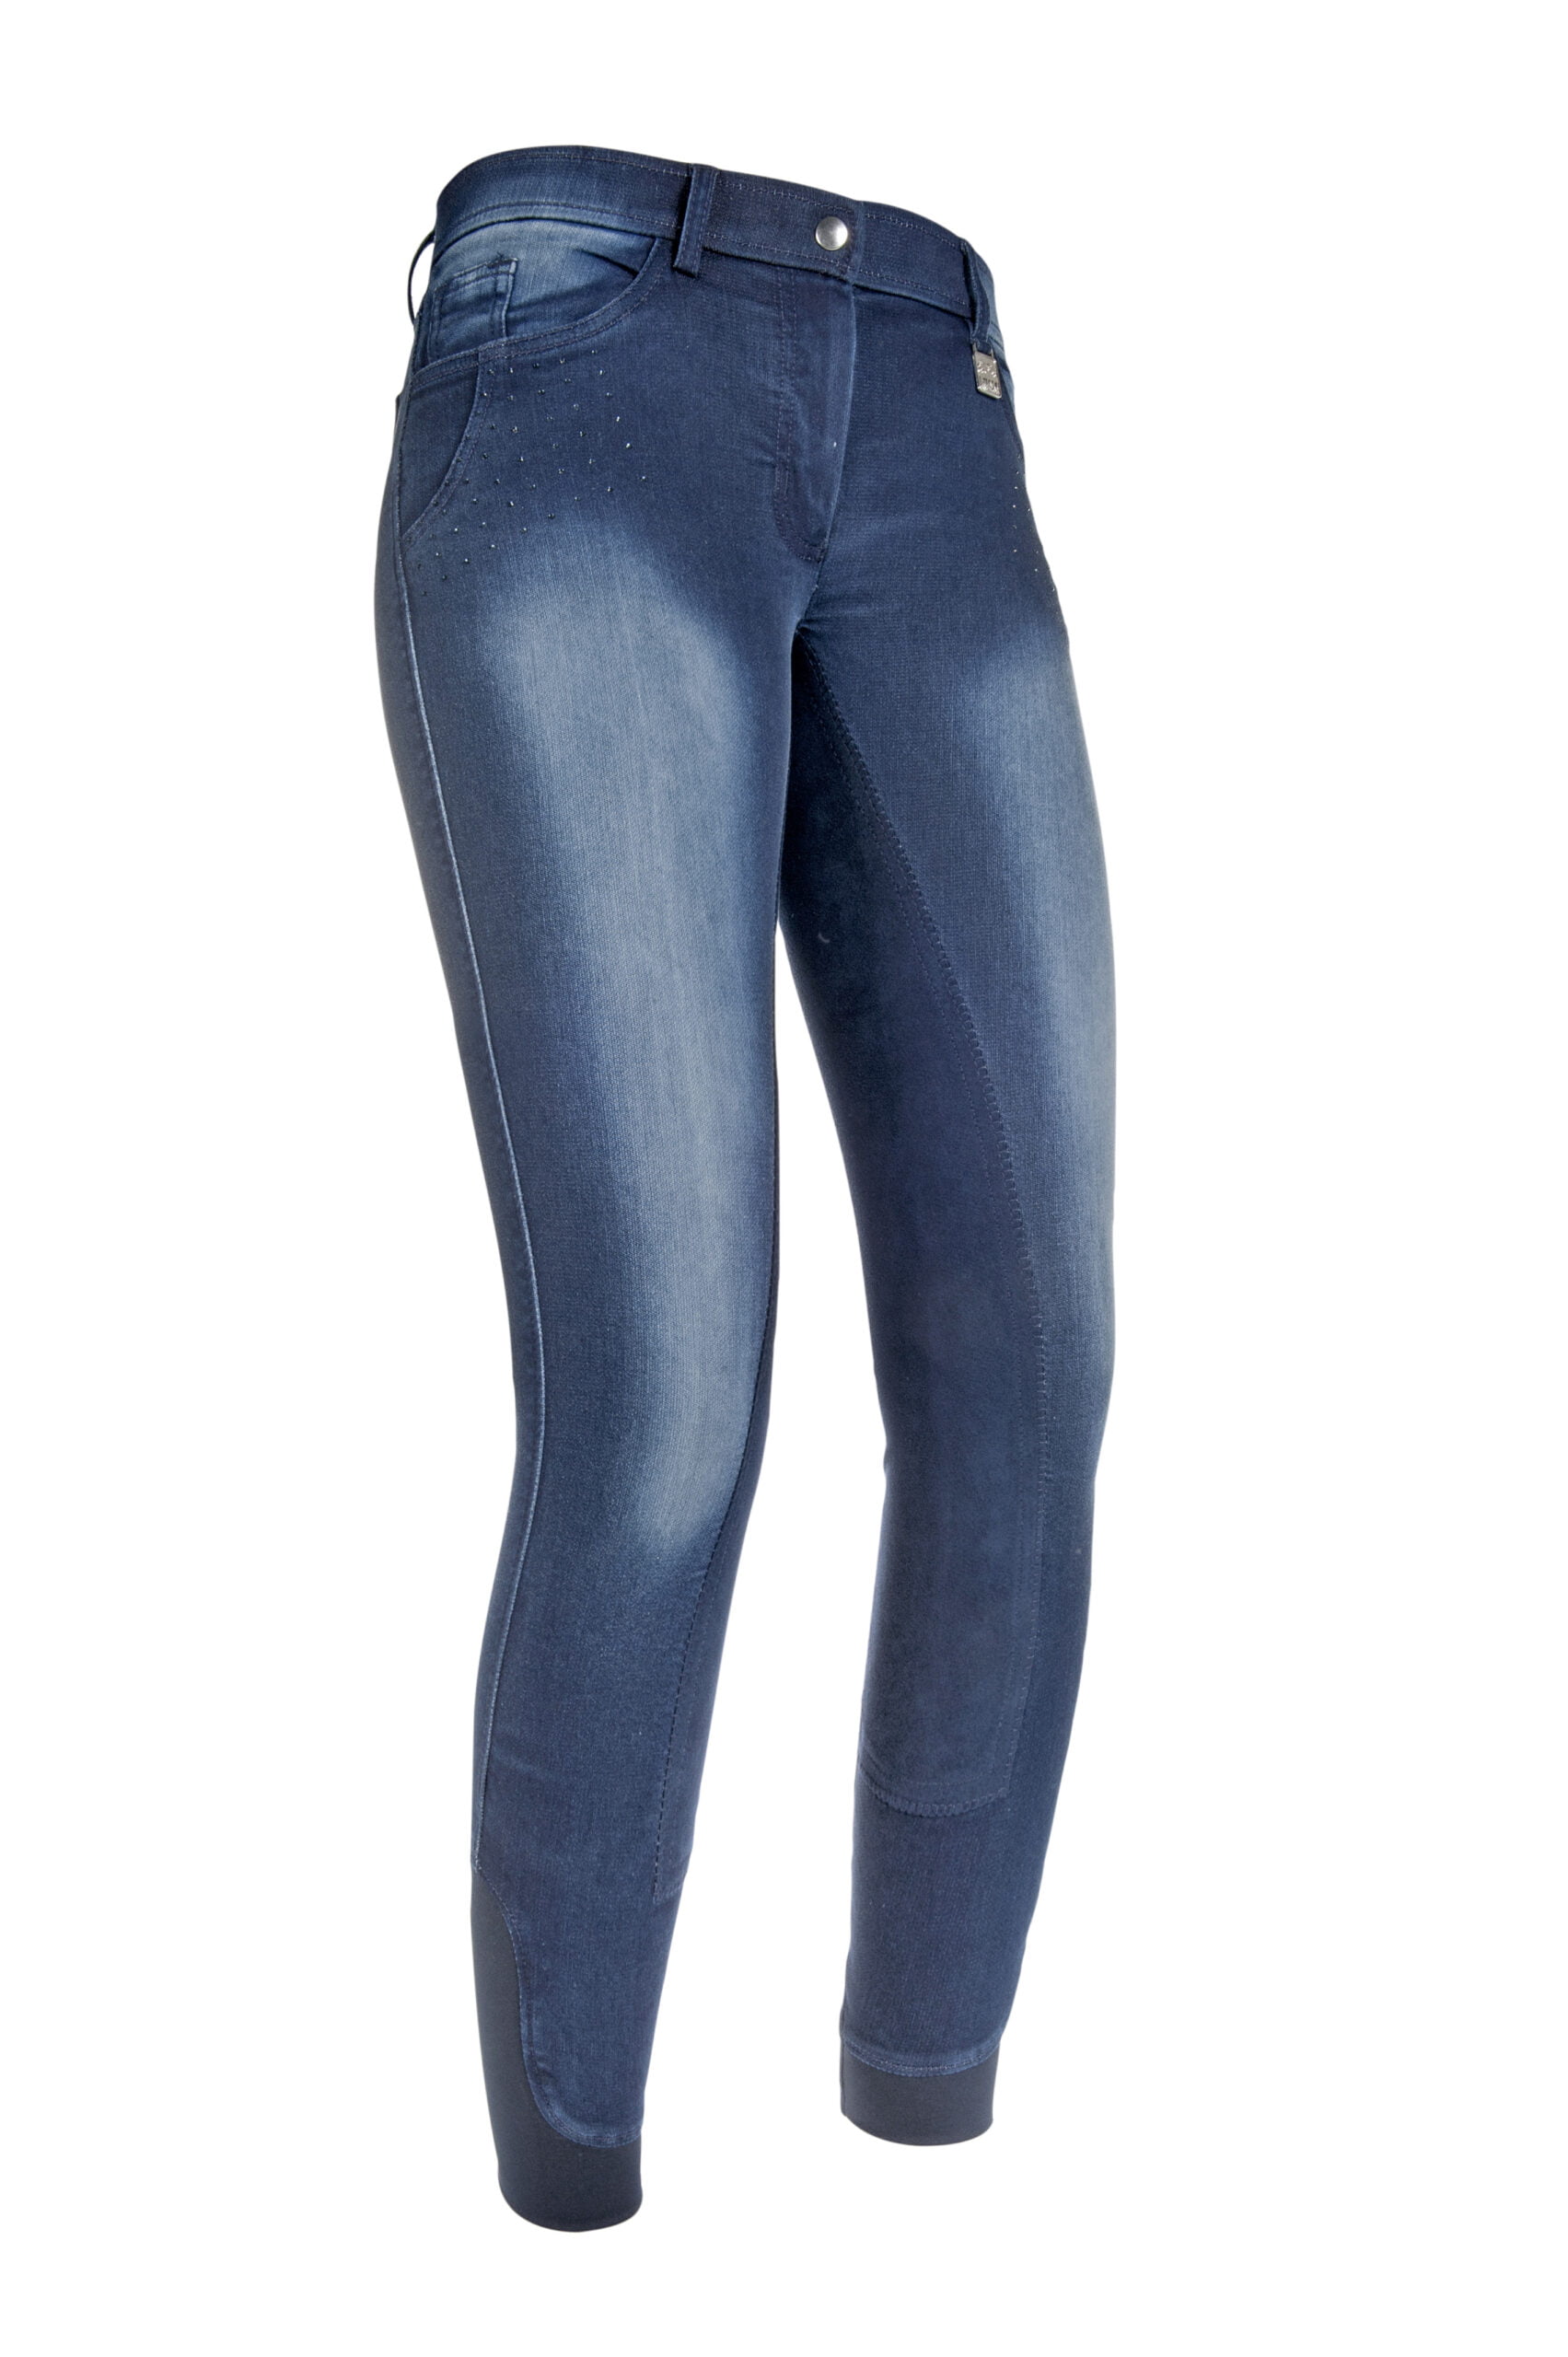 HKM Riding Breeches Jeggings Flower Crystal 3/4 Alos - The Connected Rider  San Antonio English Tack Store